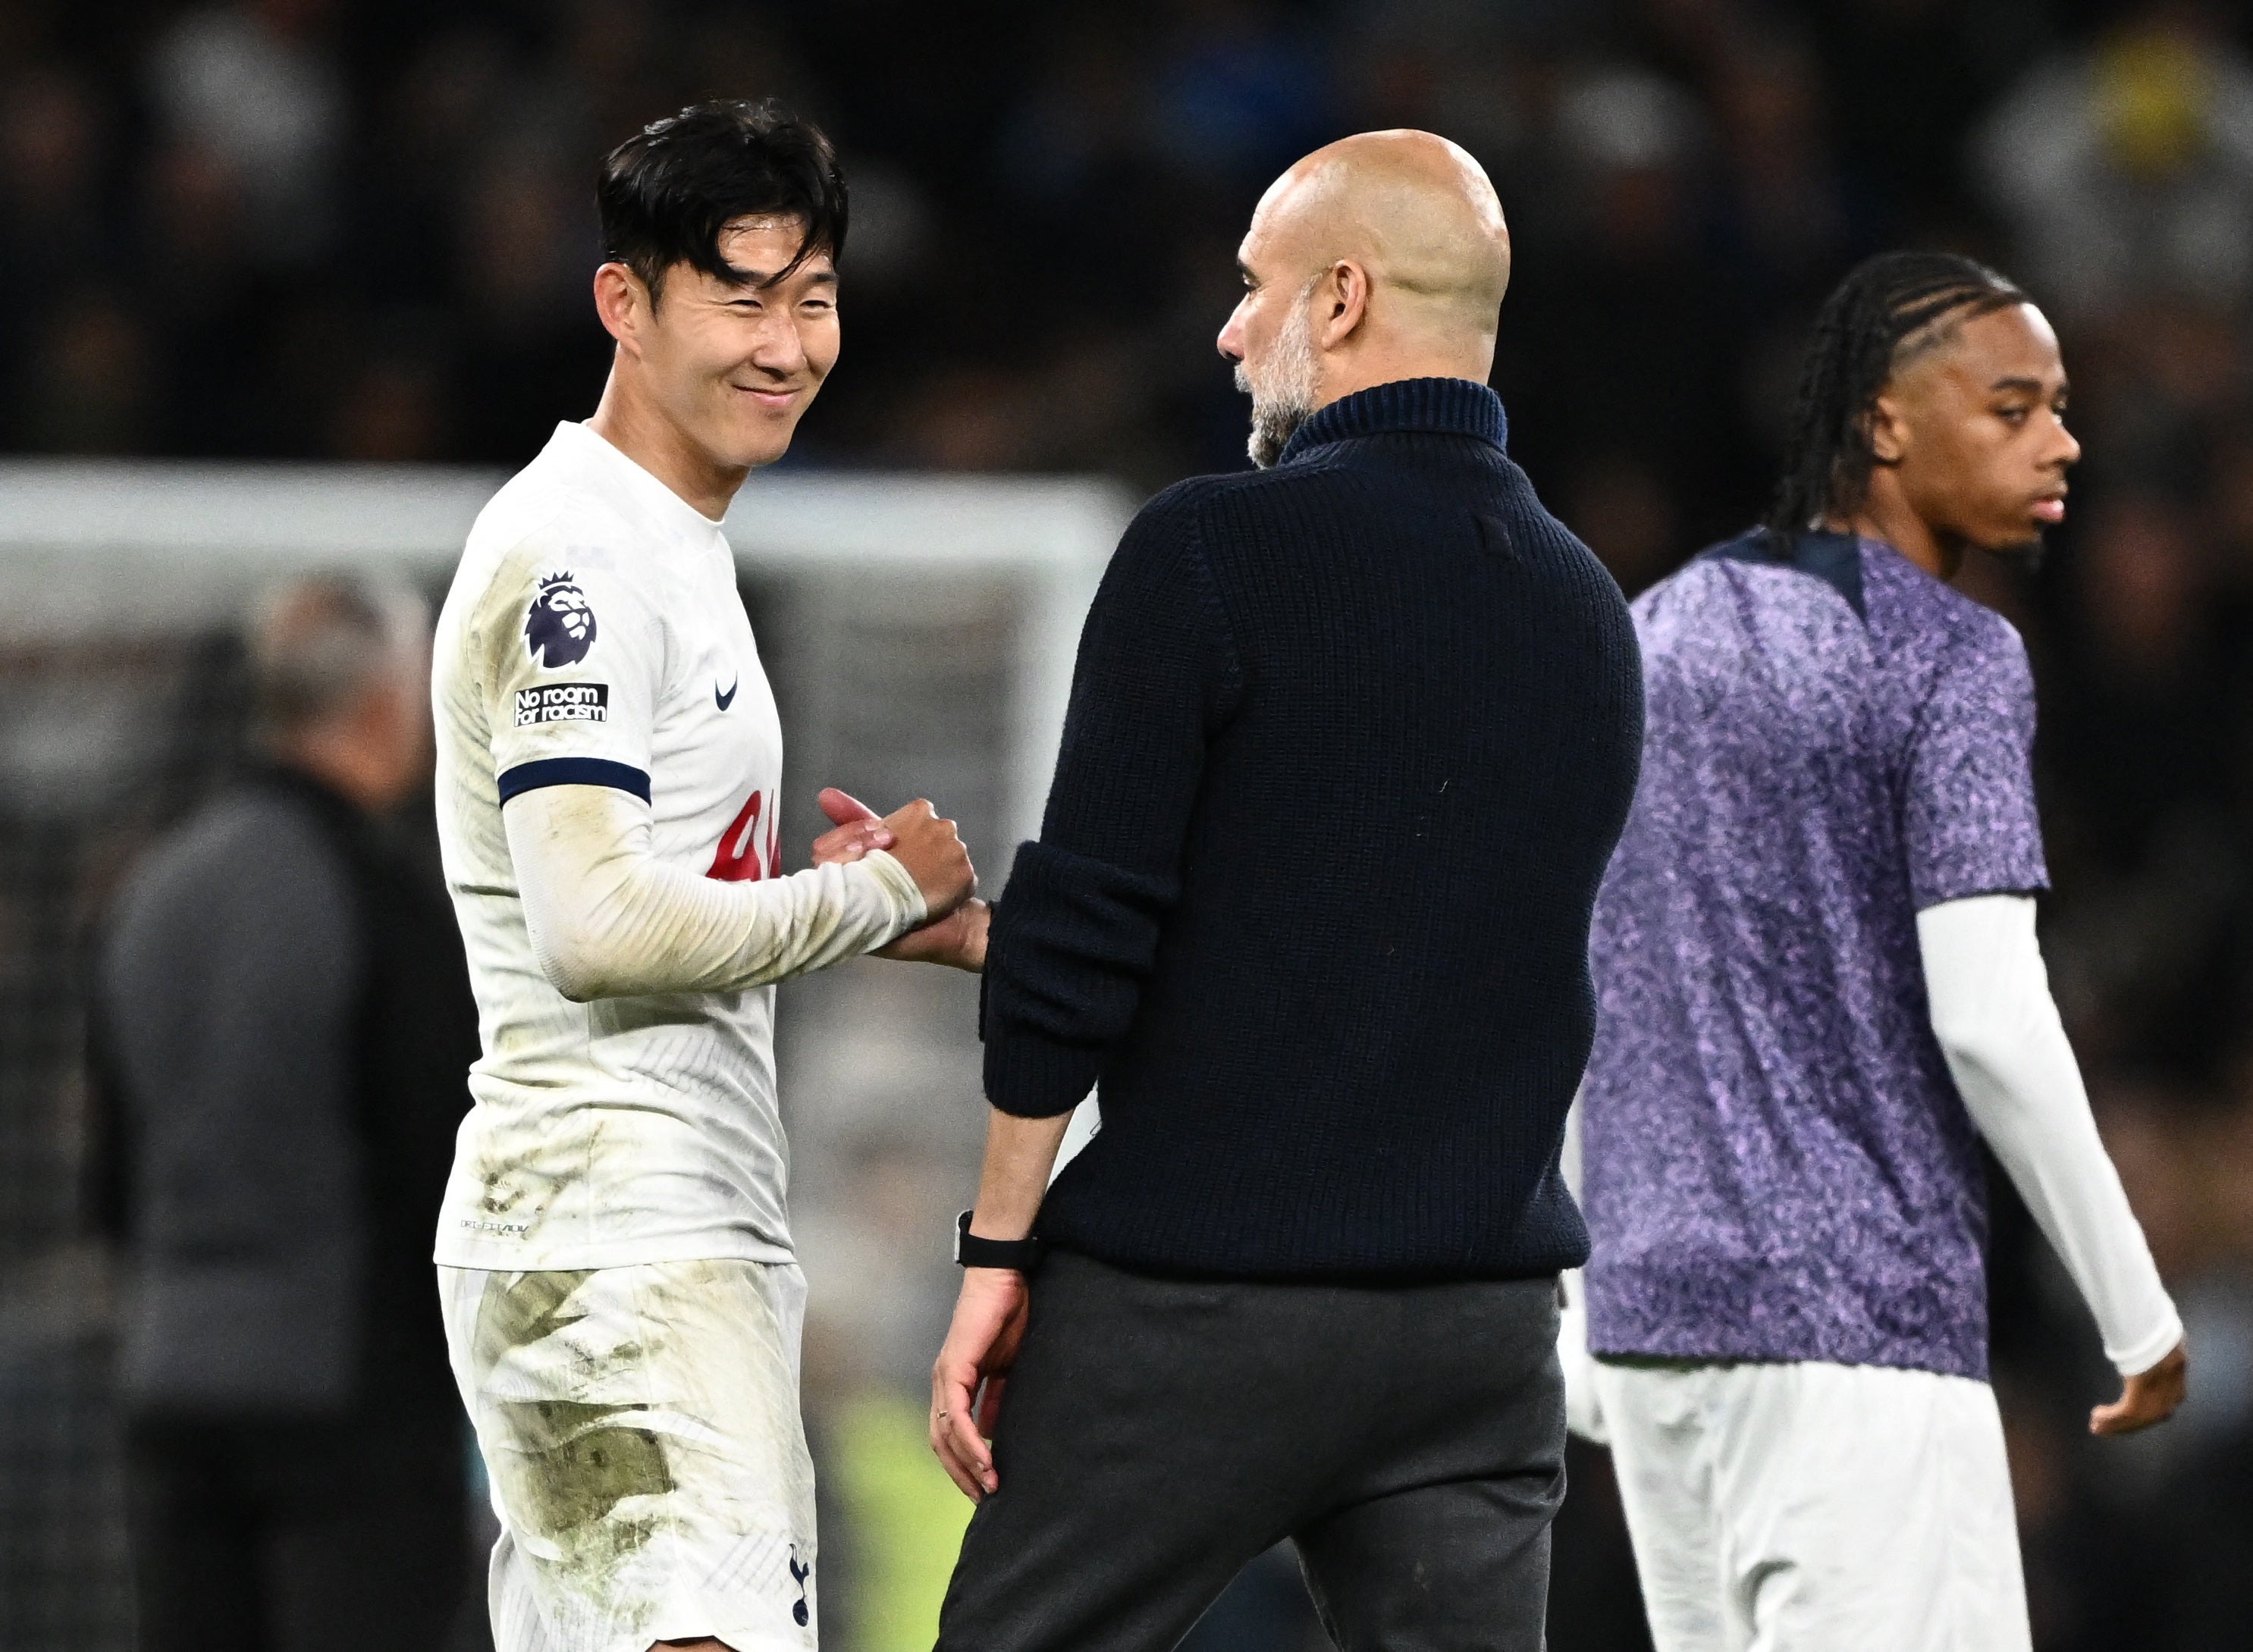 Son shares a handshake with Pep Guardiola at full-time